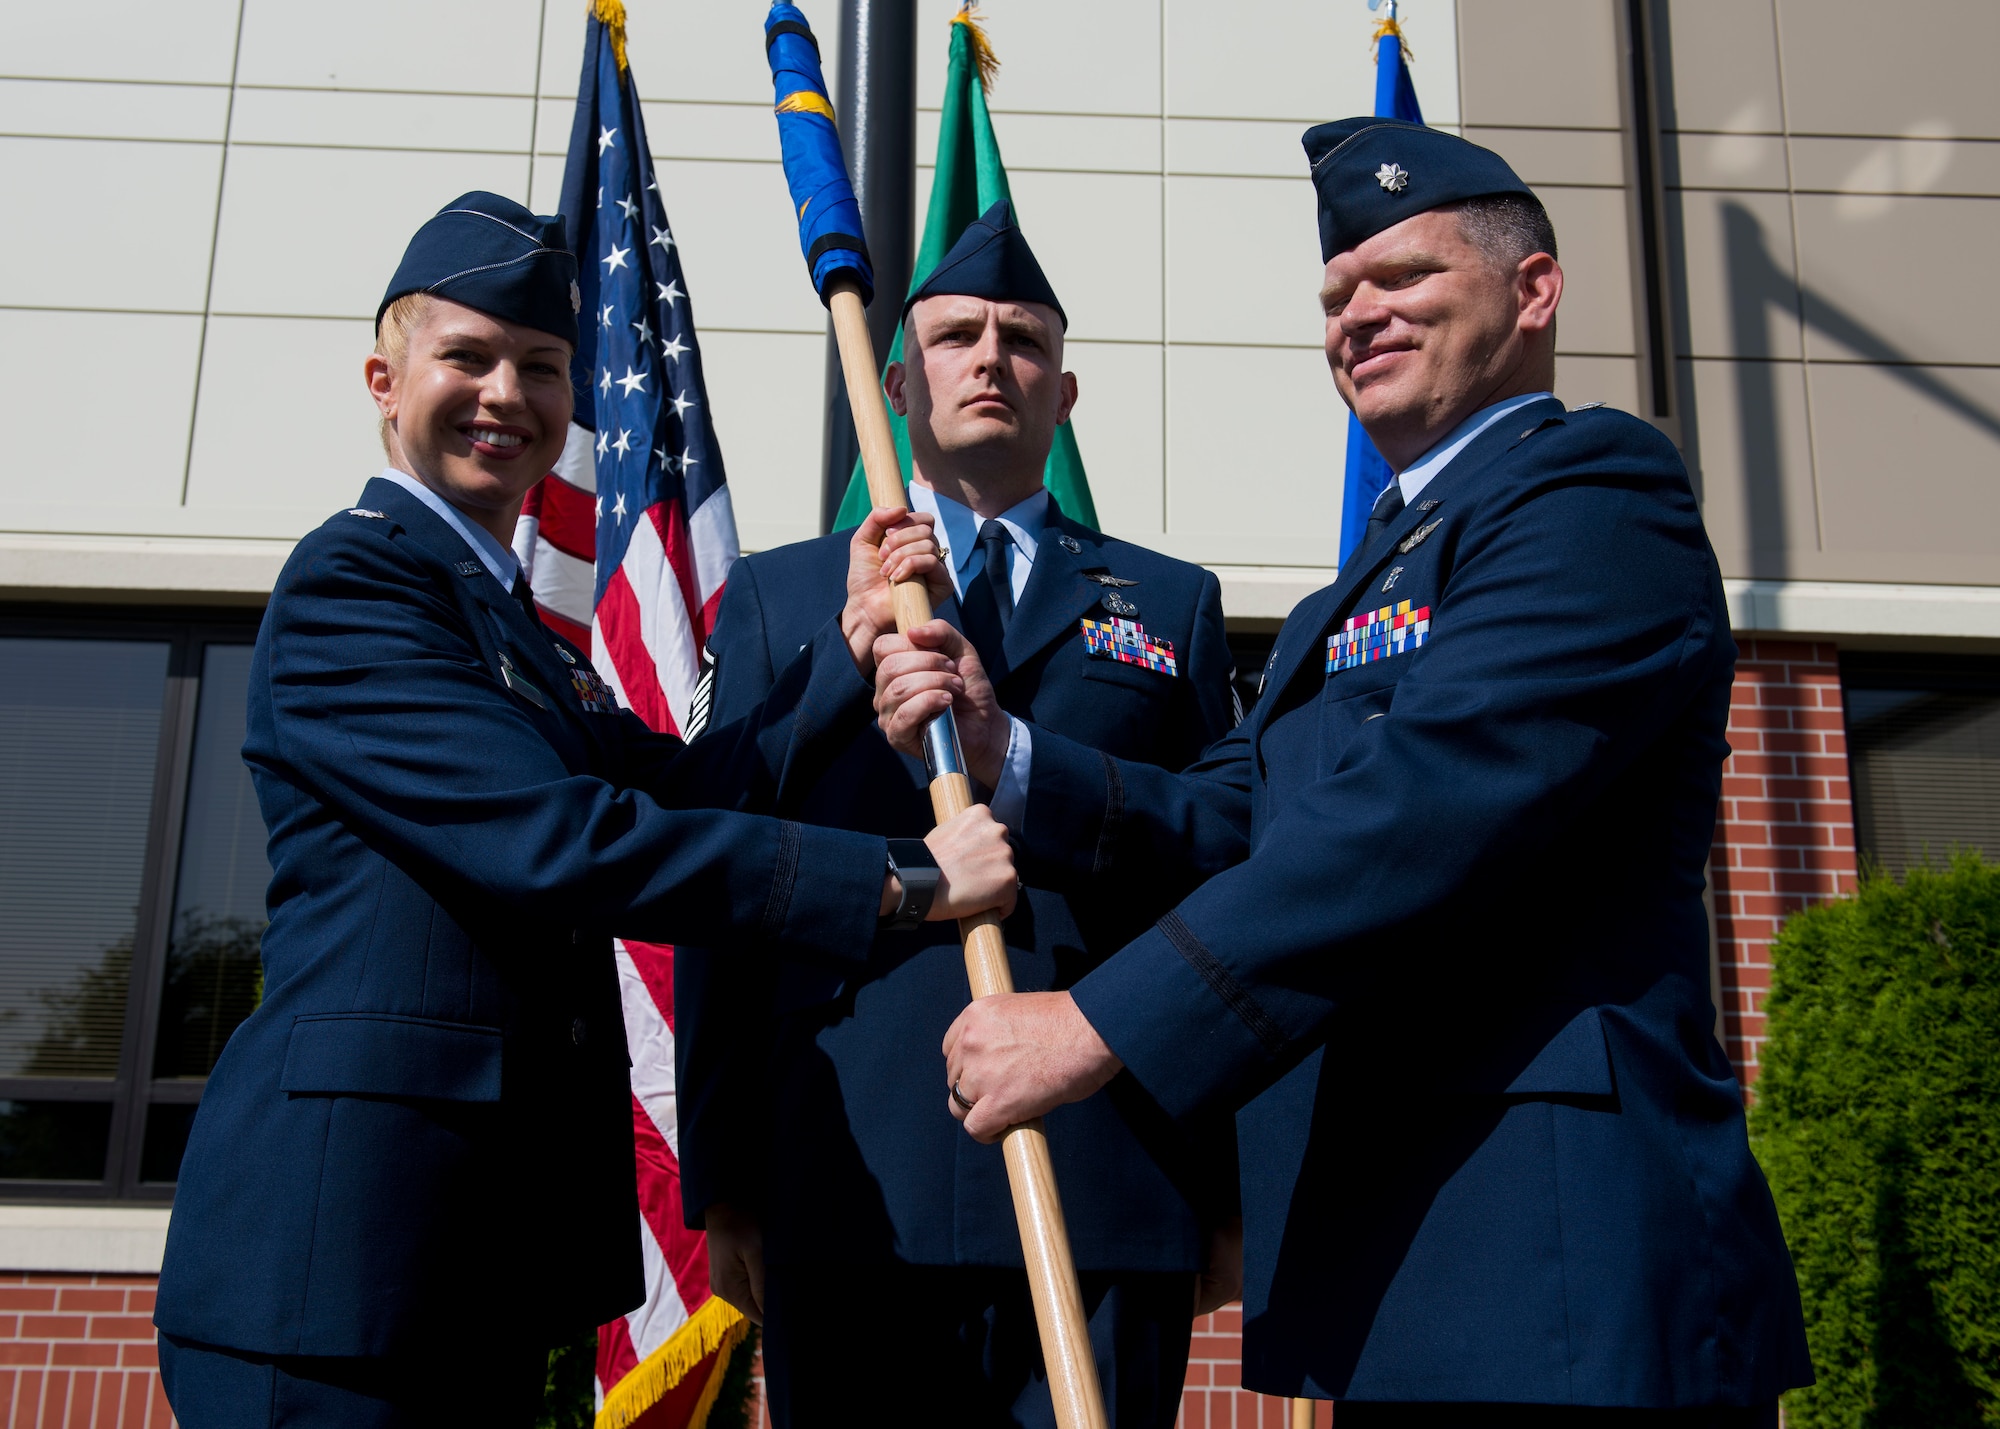 U.S. Air Force Lt. Col. Heather Nelson, 92nd Medical Group commander, passes the new 92nd Operational Medical Readiness Squadron guidon to Lt. Col. Daniel Hatcher, 92nd OMRS commander, during a re-designation ceremony at Fairchild Air Force Base, Washington, July 19, 2019. The purpose of the medical re-designation is to better focus resources to promote readiness and ensure retirees and beneficiaries their health care benefits. (U.S. Air Force photo by Airman 1st Class Lawrence Sena)